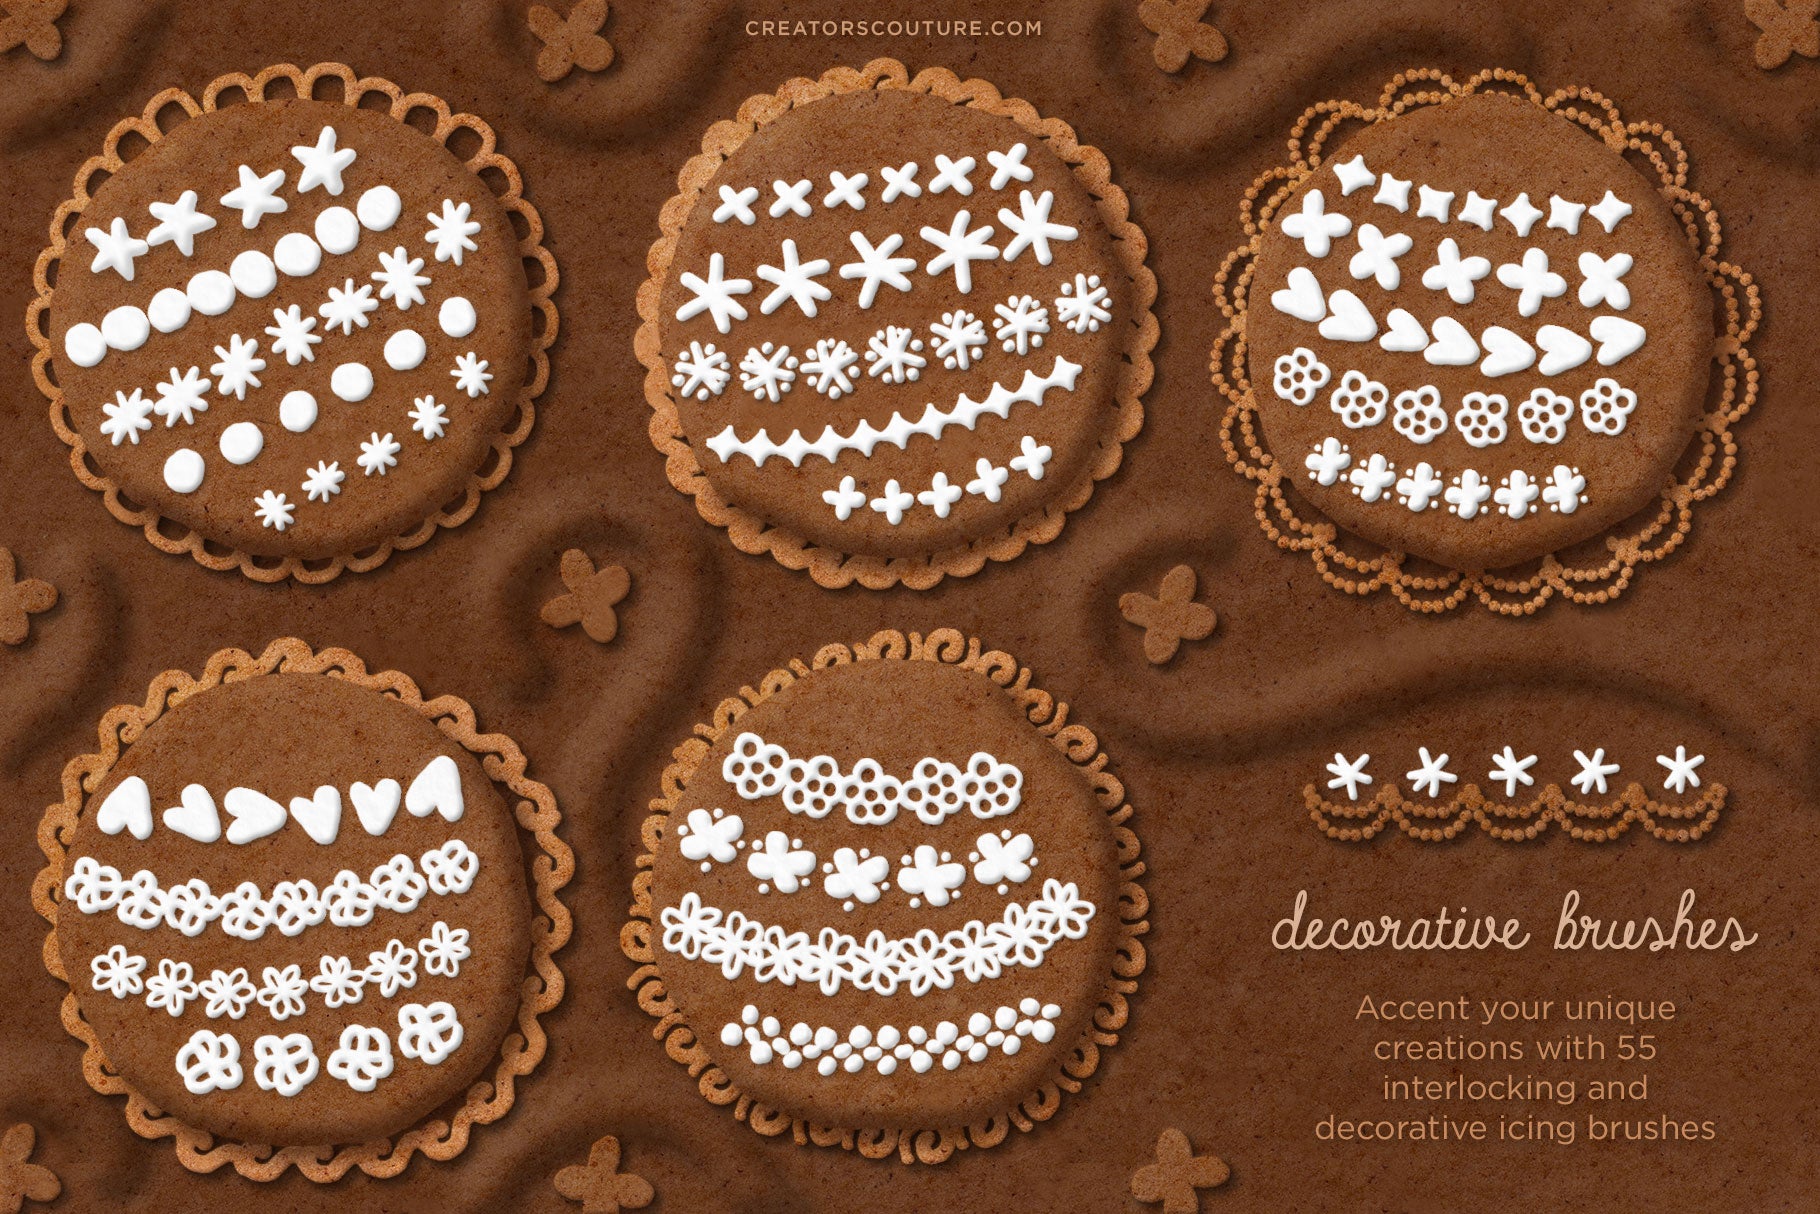 Gingerbread, Cookie, & Cake Graphic & Lettering Effects for Photoshop, icing brushes and styles